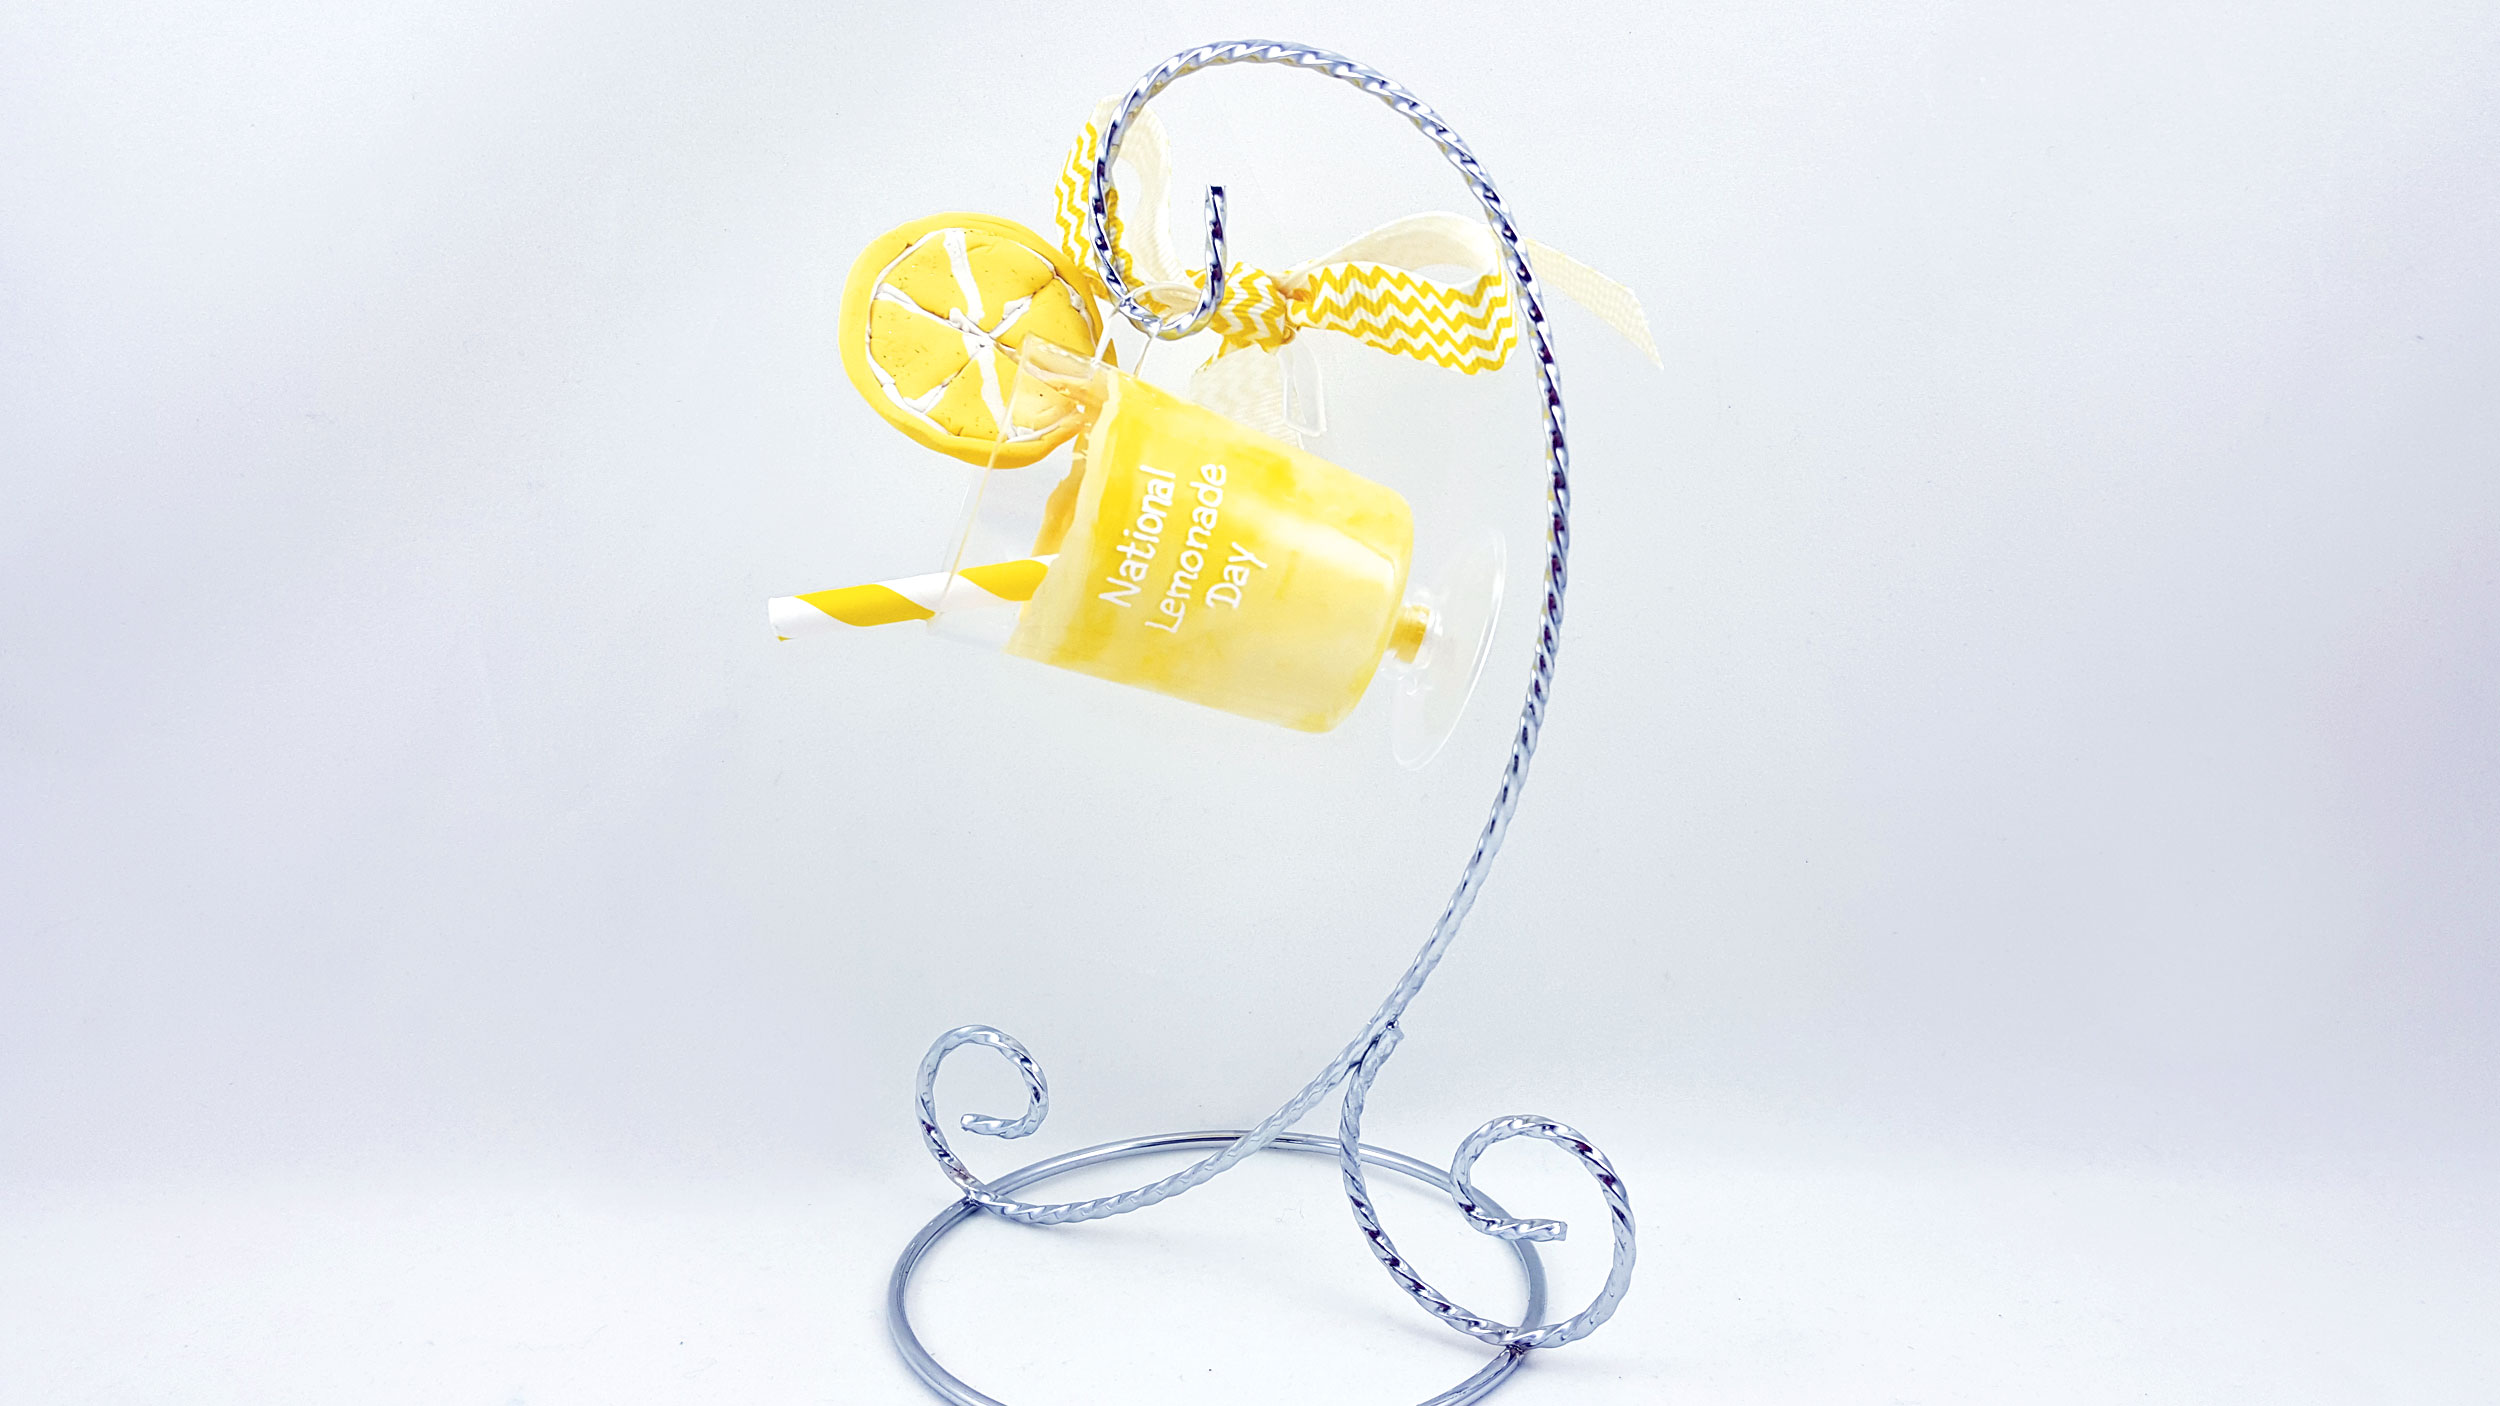 A final lemonade ornament hangs from it's very own ornament stand for display in a kitchen. | OrnamentShop.com